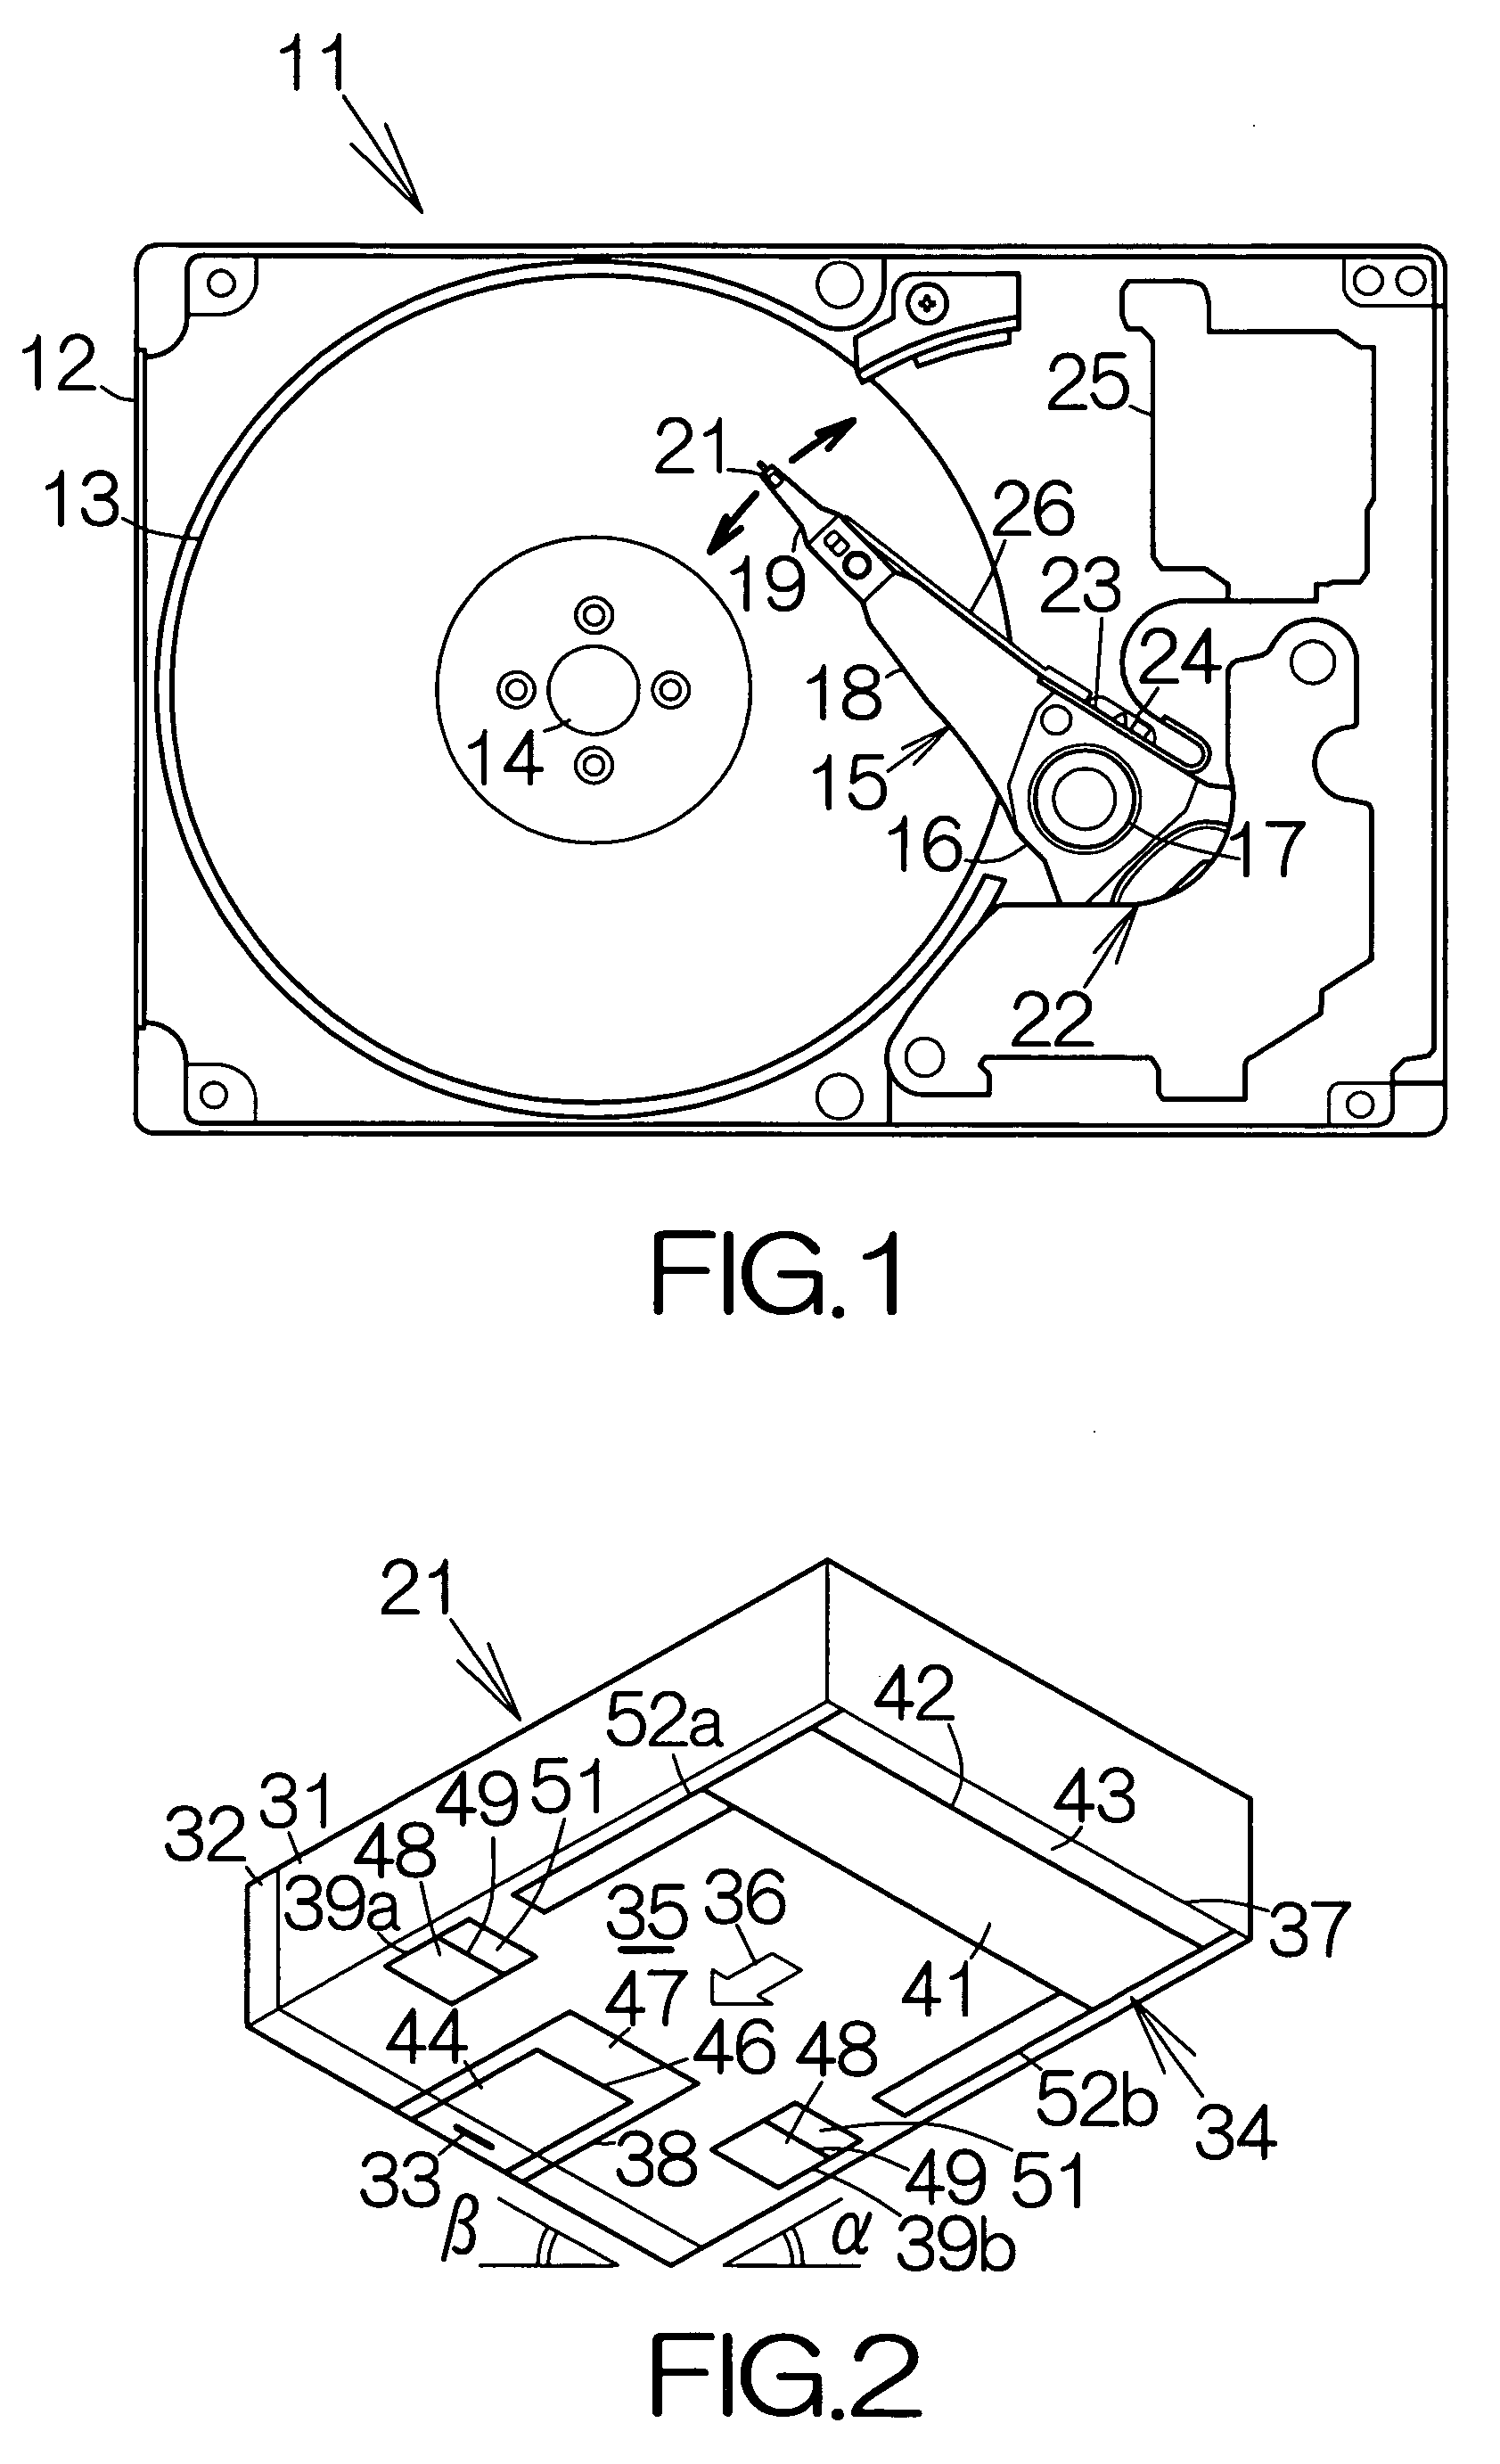 Head slider having protruding head element and apparatus for determining protrusion amount of head element